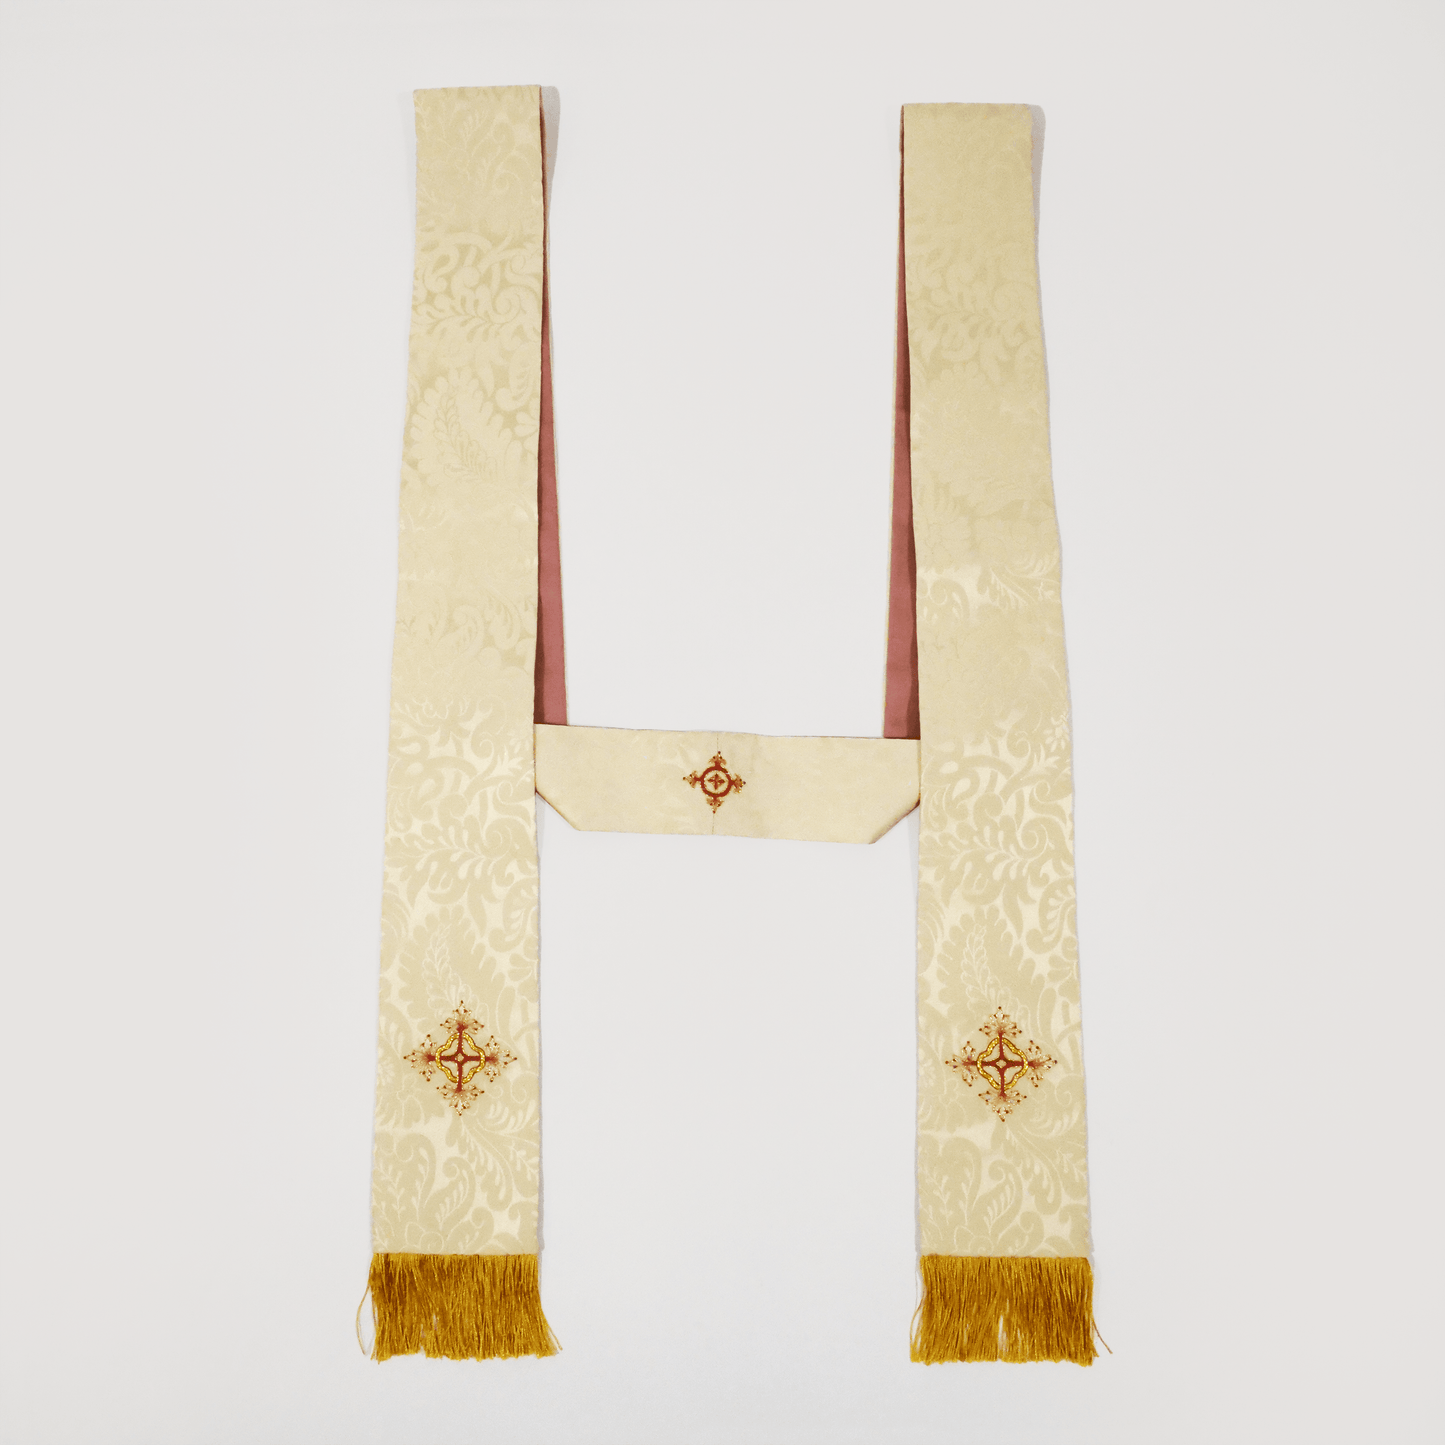 Stole in Cream 'Holbein' with Hand Embroidered Crosses